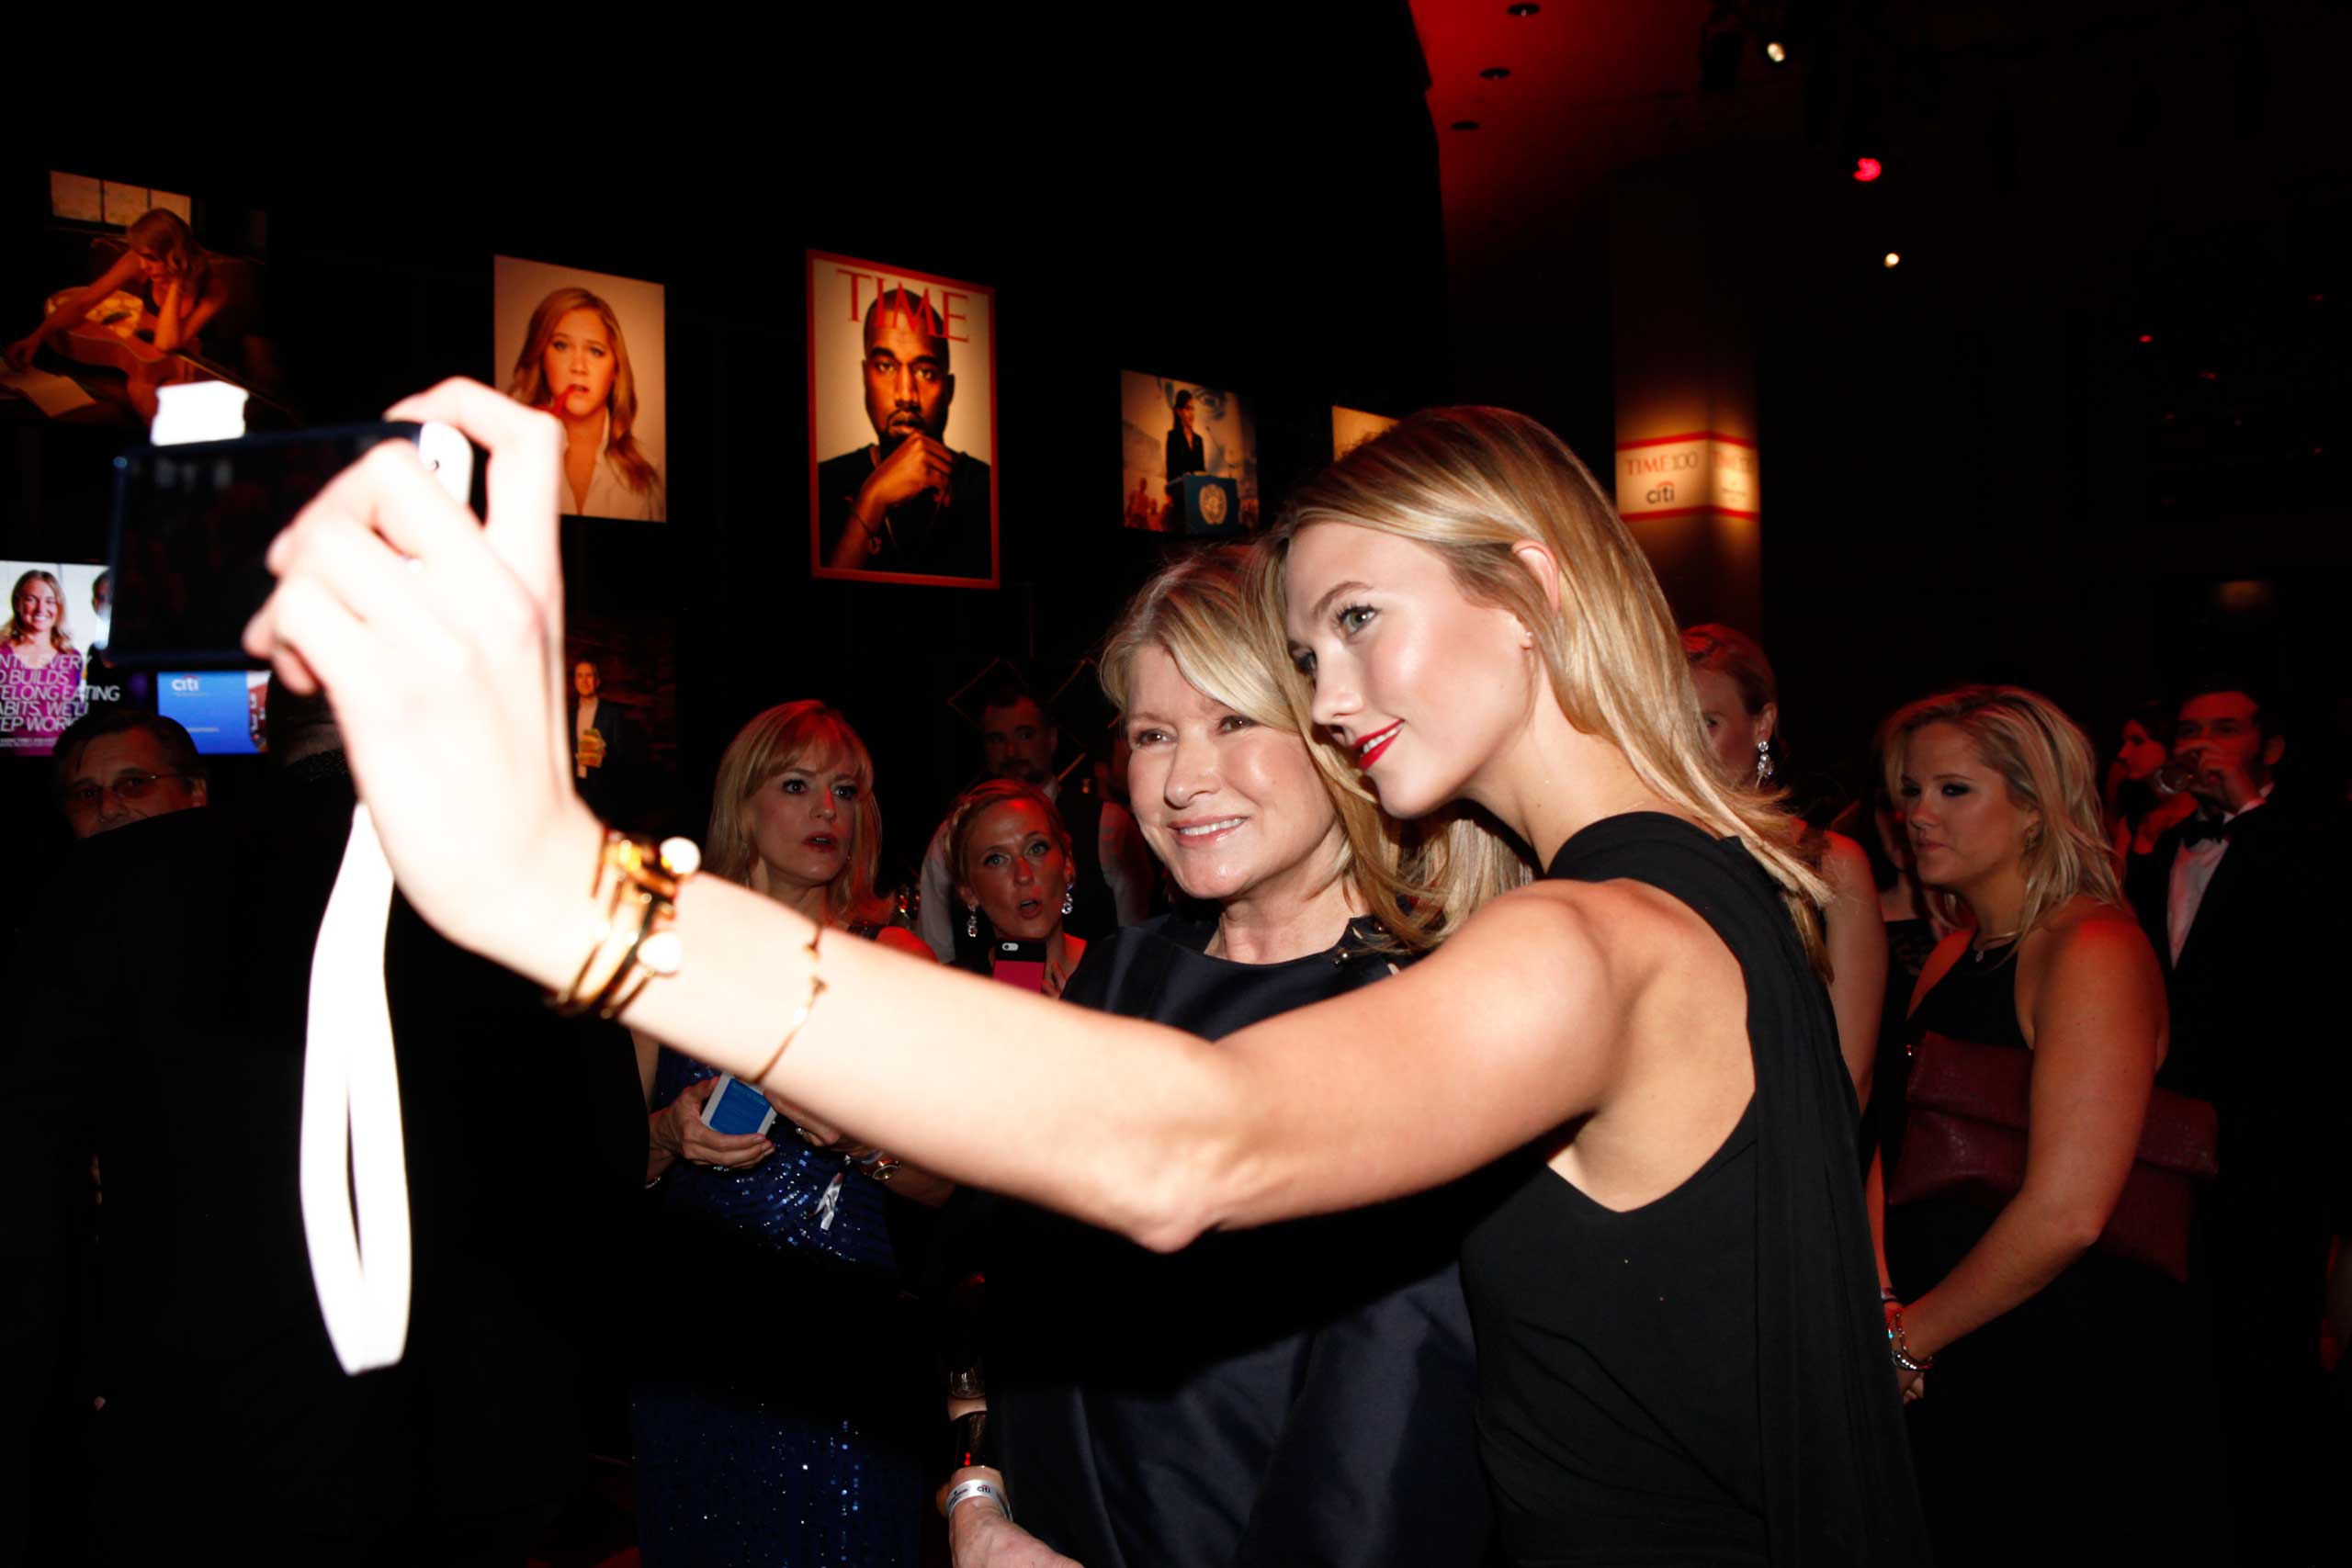 Martha Stewart and Karlie Kloss attend the TIME 100 Gala at Jazz at Lincoln Center in New York City on April 21, 2015. (Andrew Hinderaker for TIME)